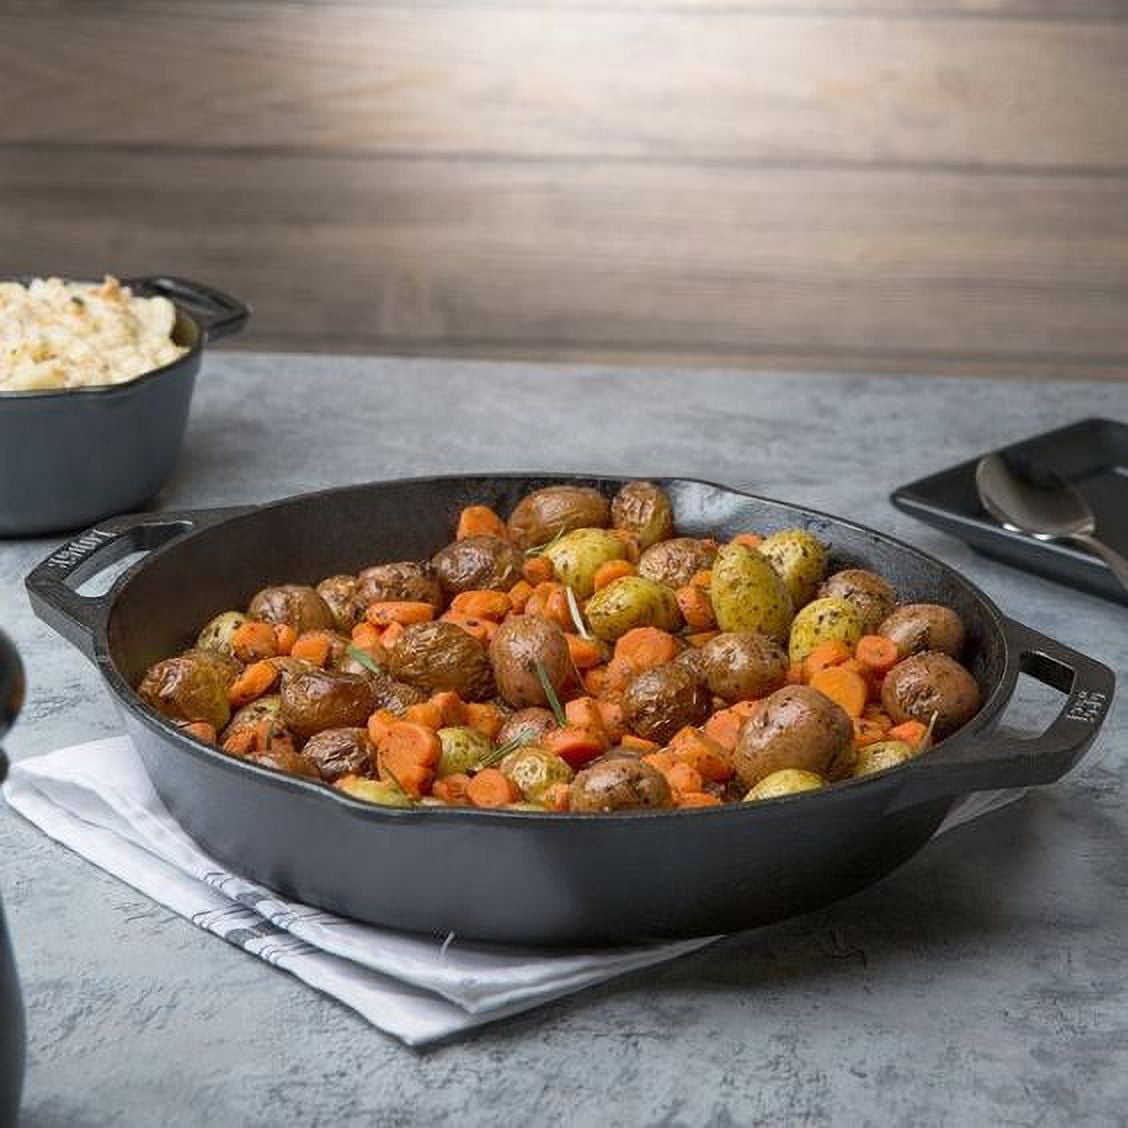 Lodge 12 In. Cast Iron Skillet with Assist Handle, 1 ct - Fry's